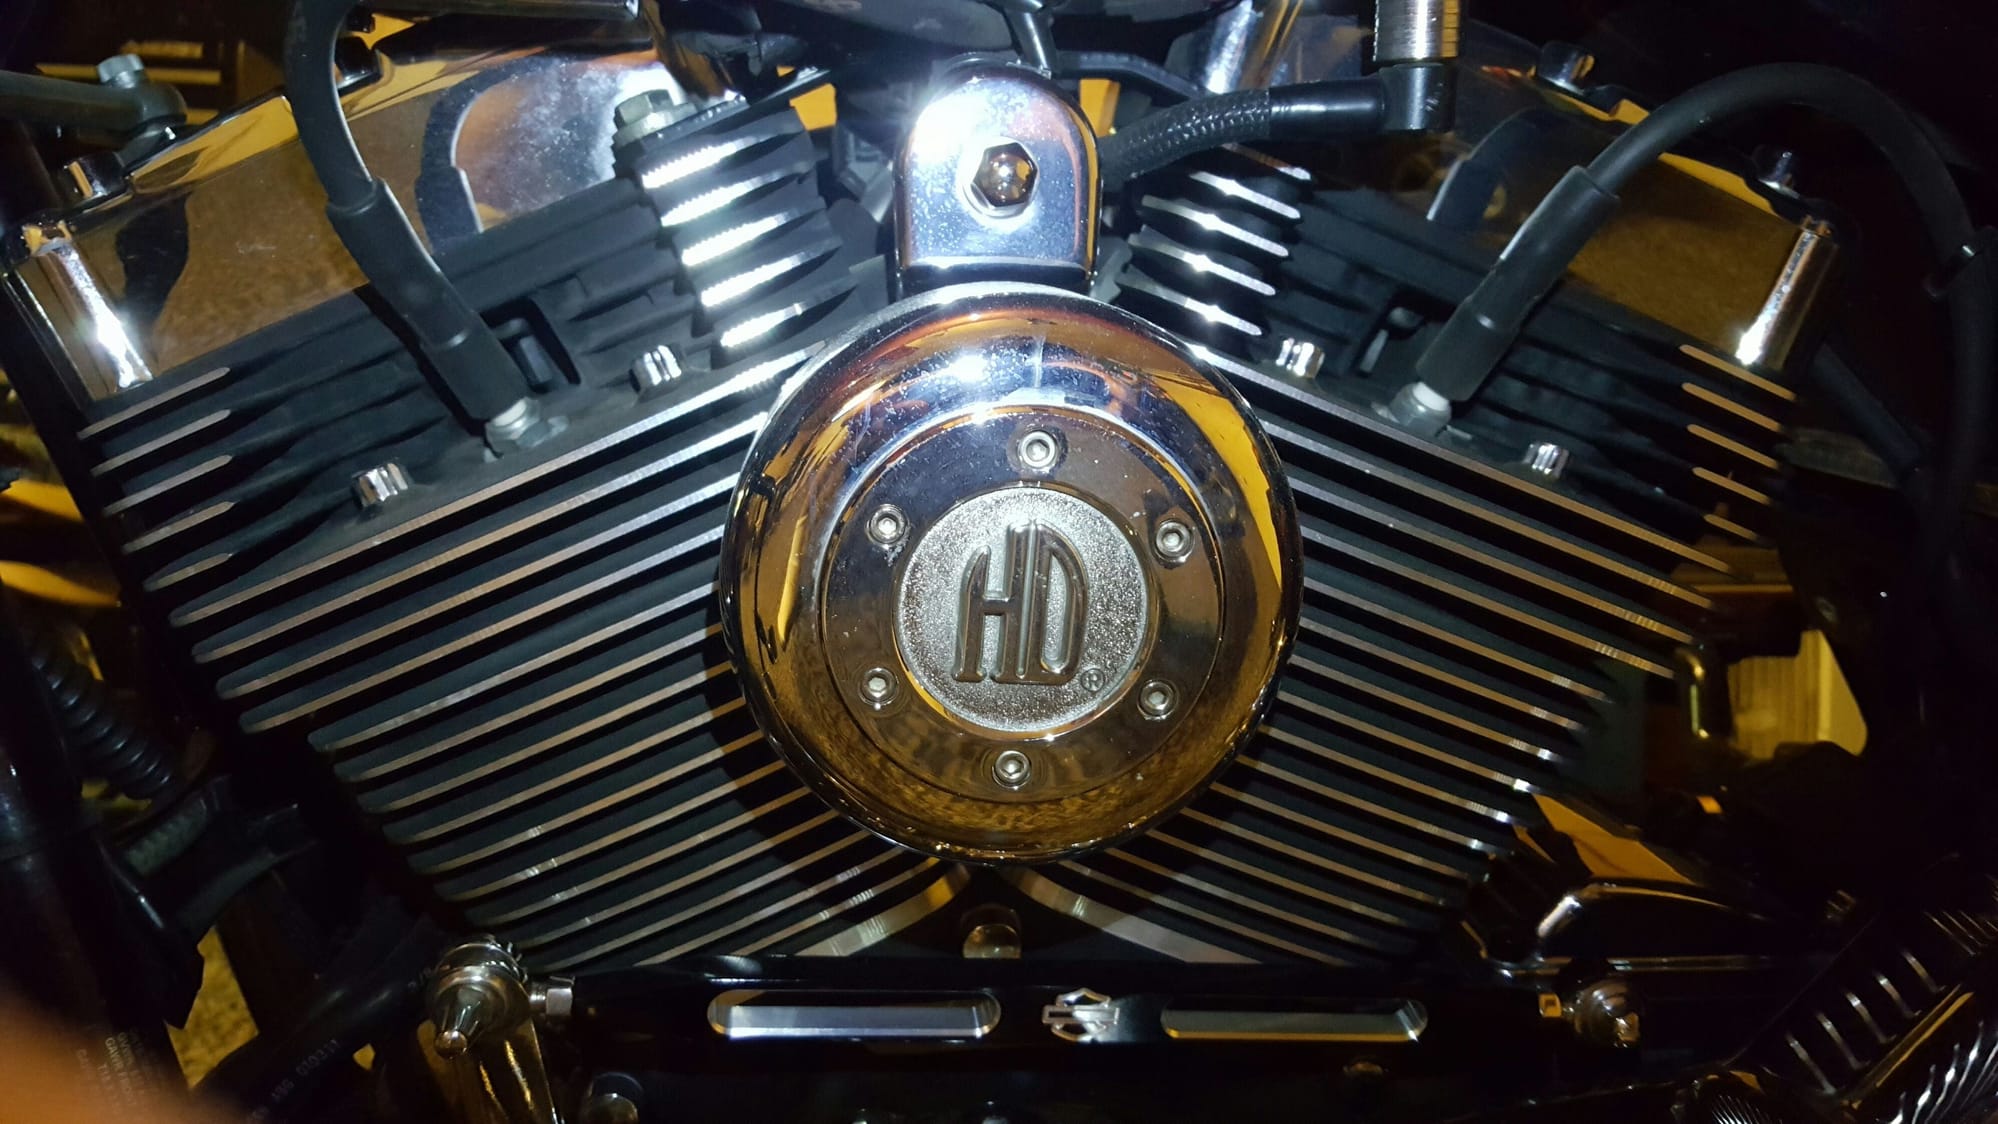 Lets see those horn covers - Harley Davidson Forums